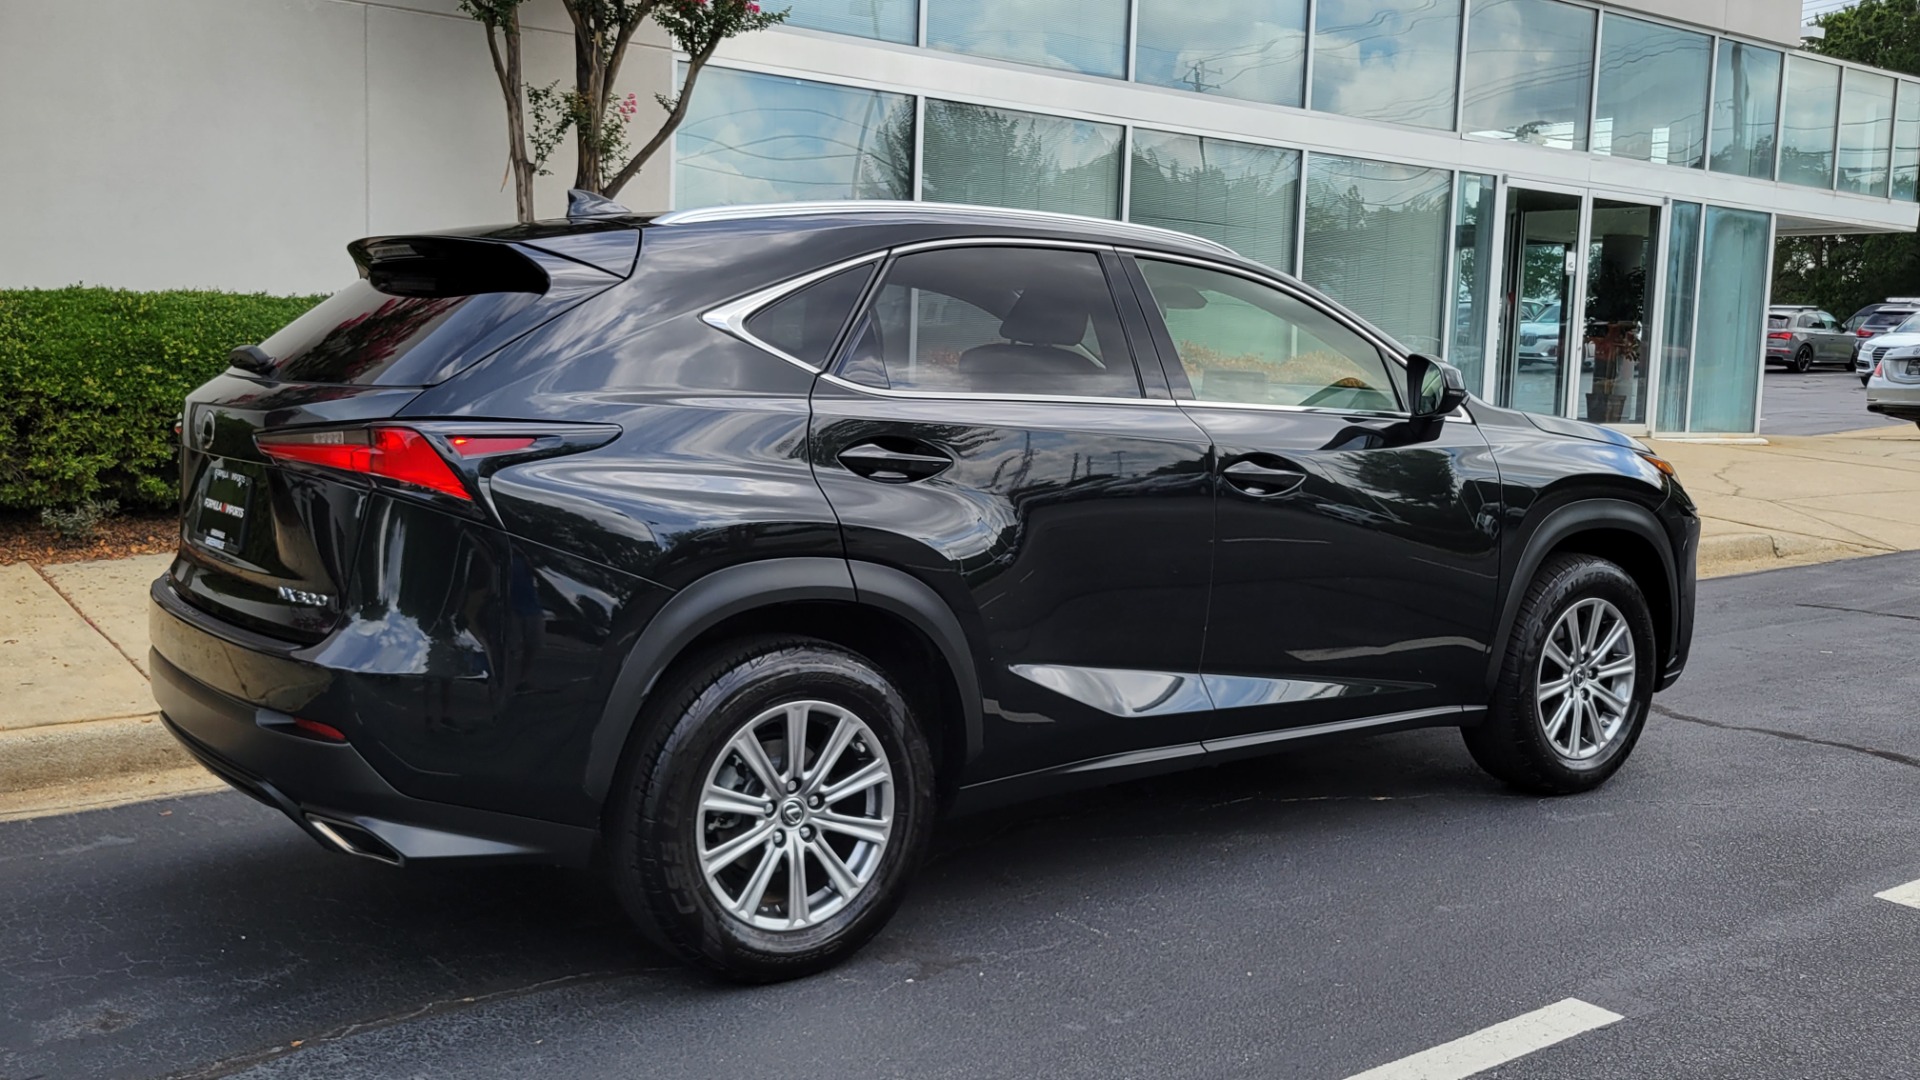 Used 2019 Lexus NX 300 / 2.0L TURBO / AUTO / SUNROOF / VENTILATED SEATS / CAMERA for sale Sold at Formula Imports in Charlotte NC 28227 6